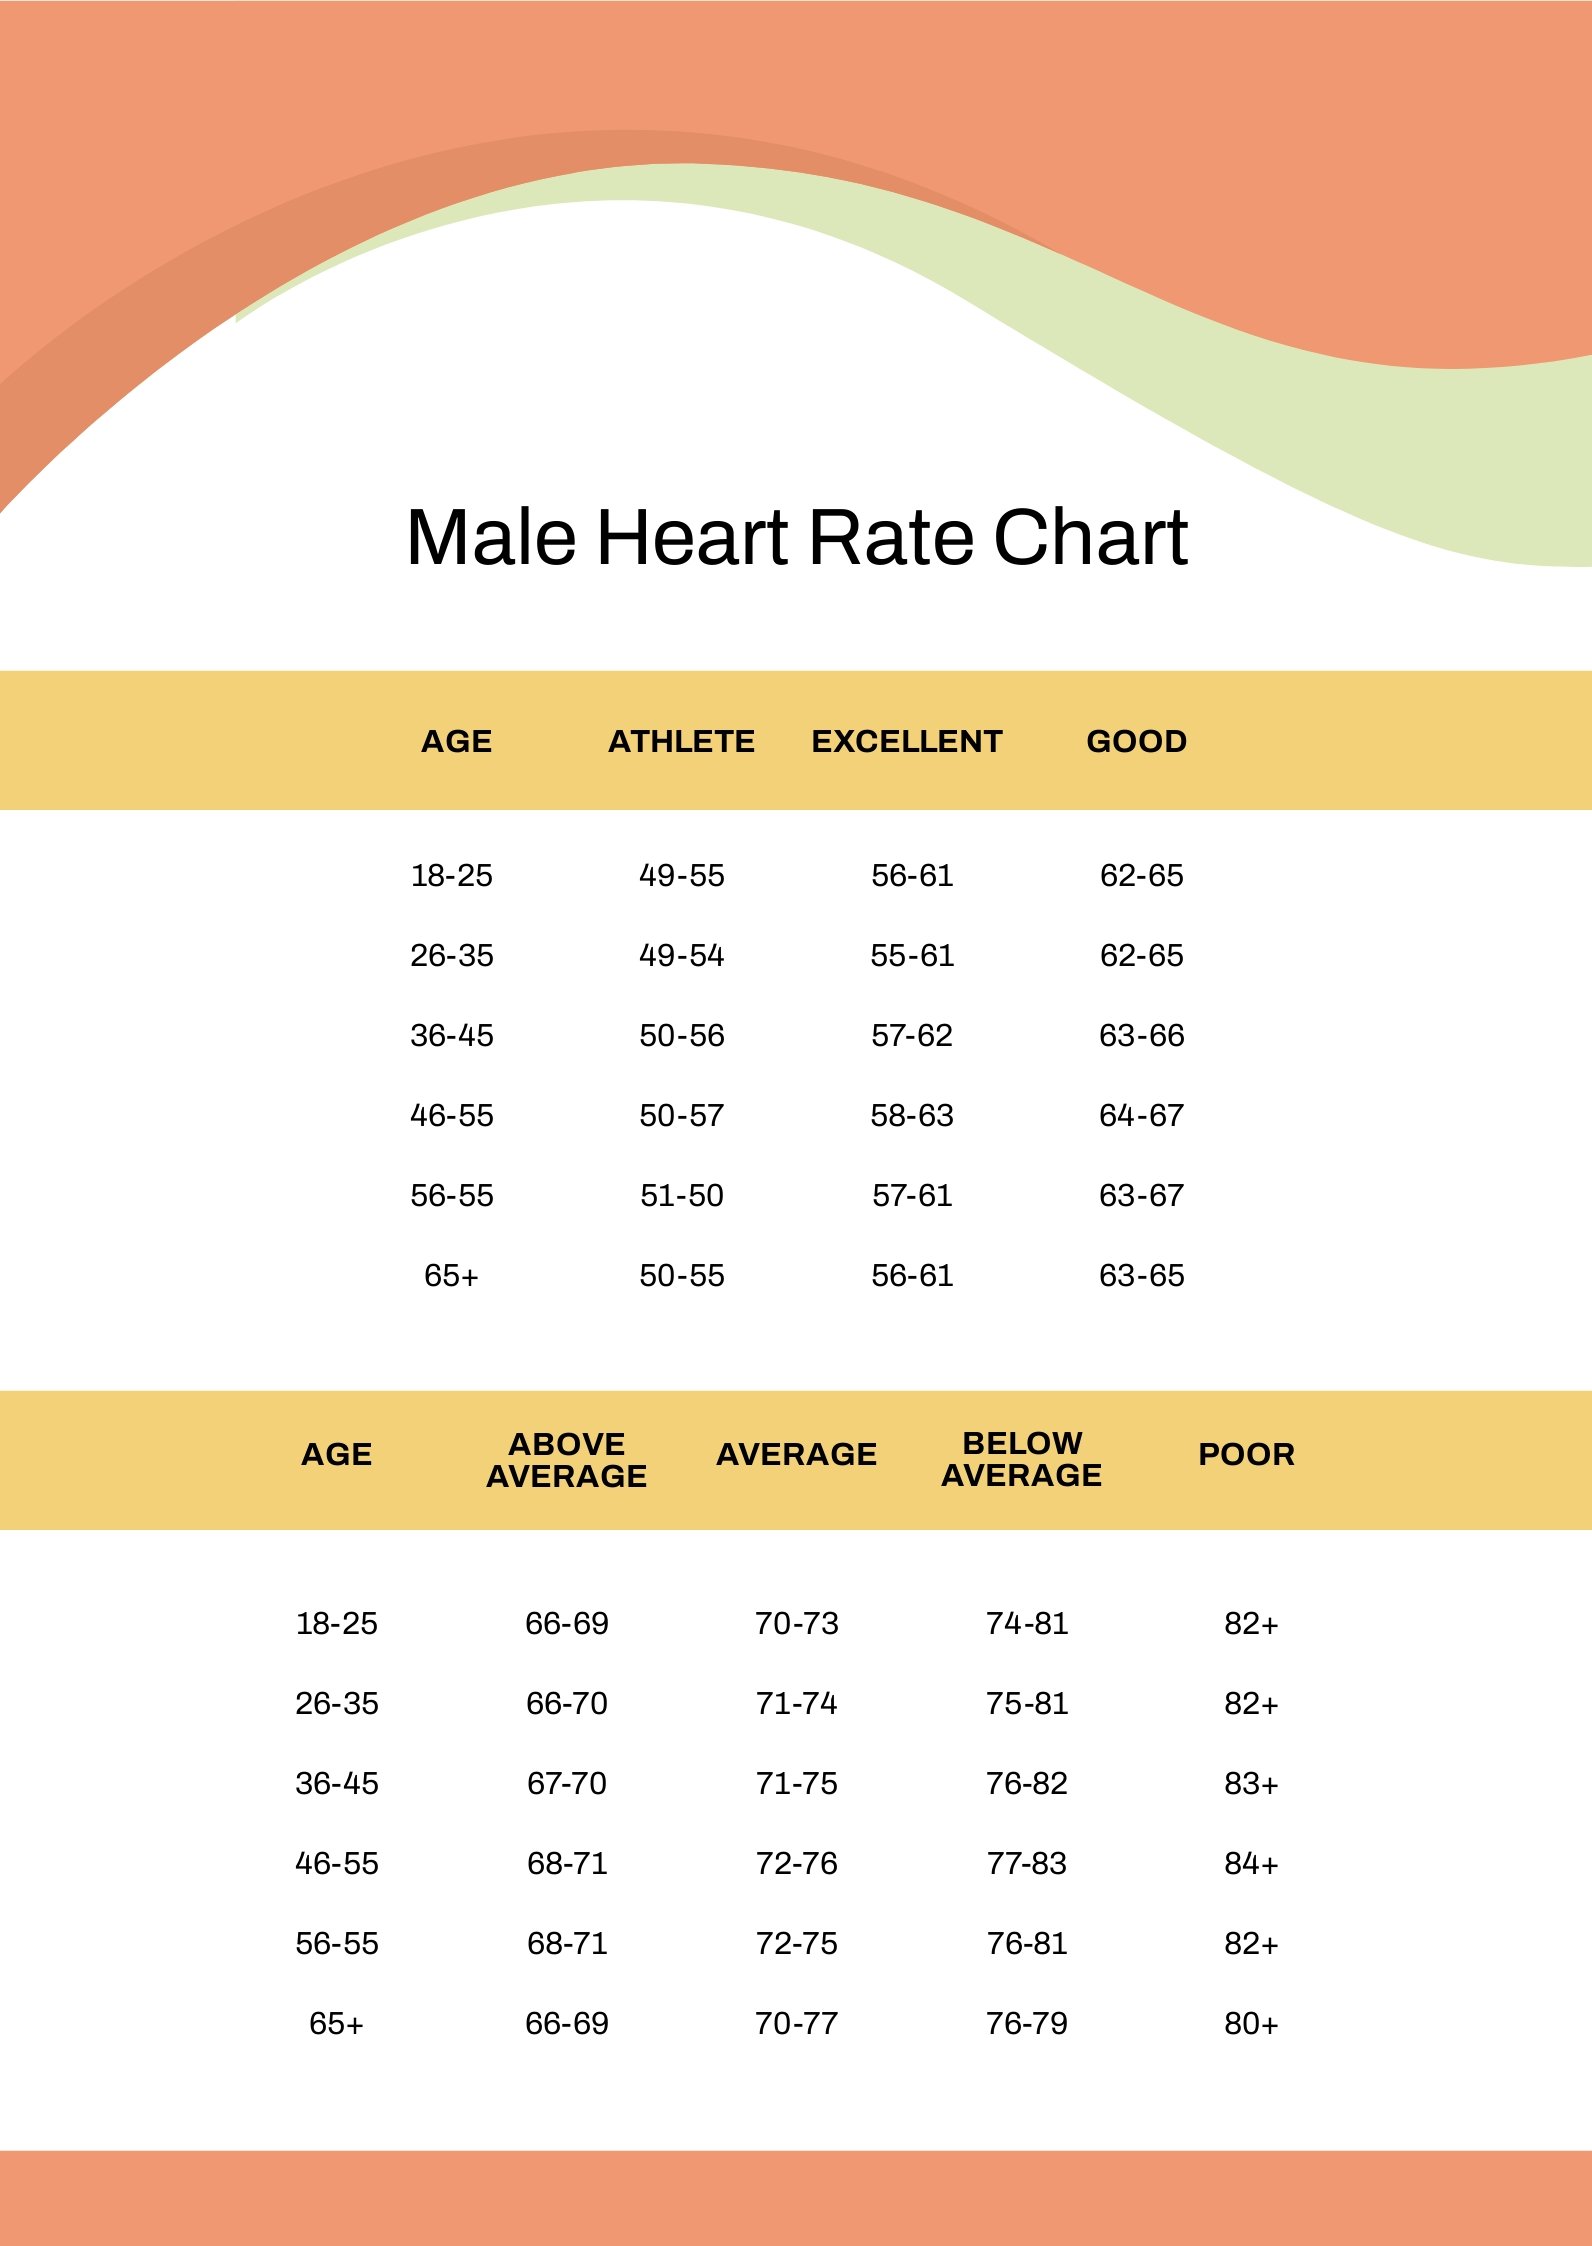 Male Heart Rate Chart In Pdf Download